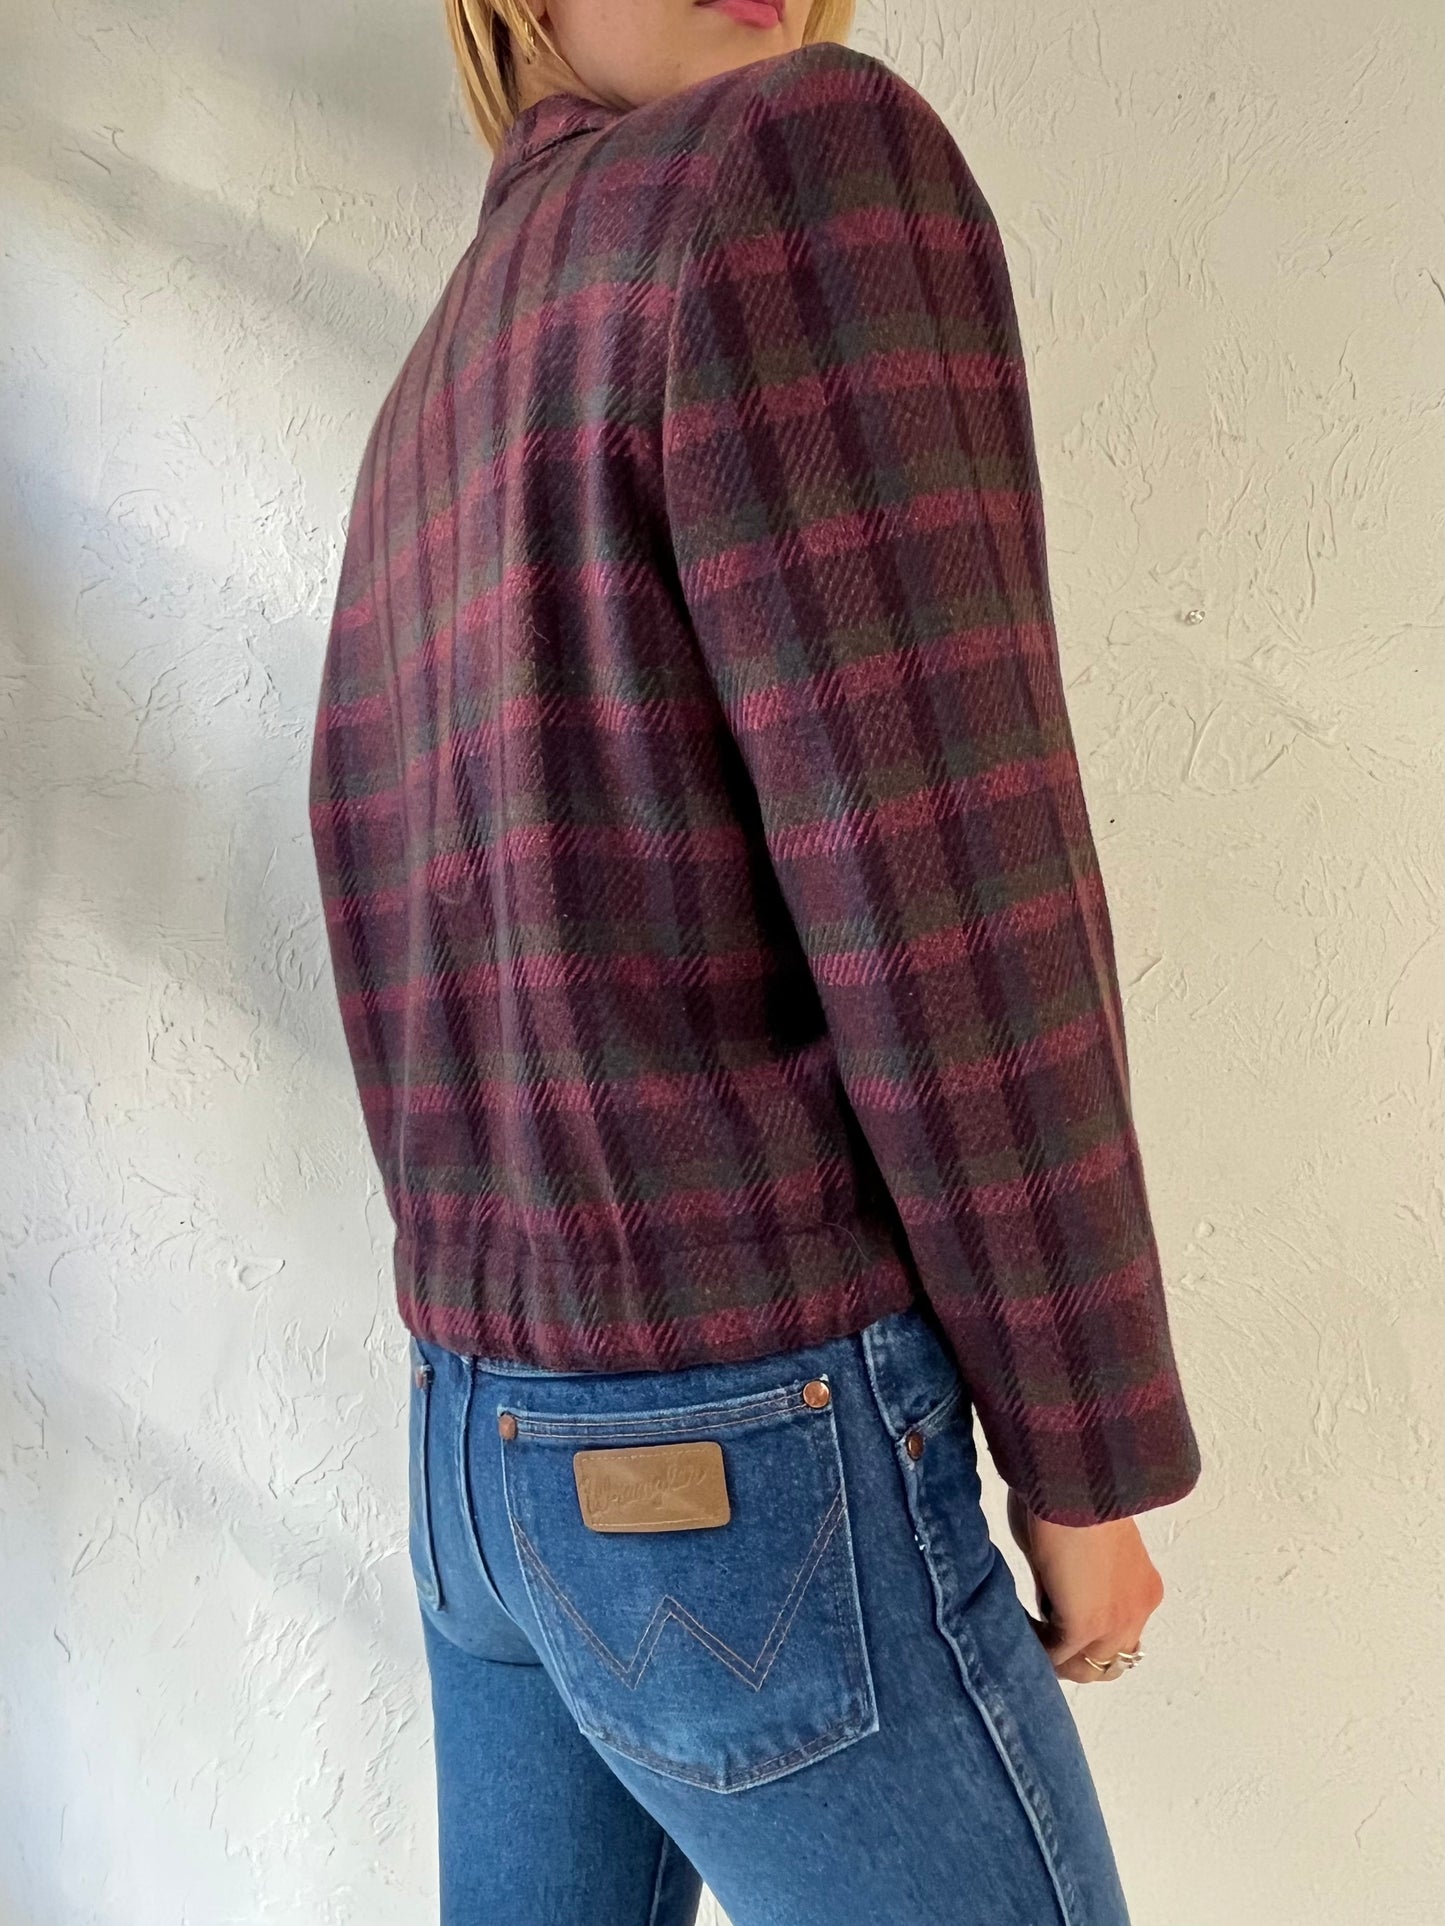 90s 'Proportion' Cropped Blazer Jacket / Small